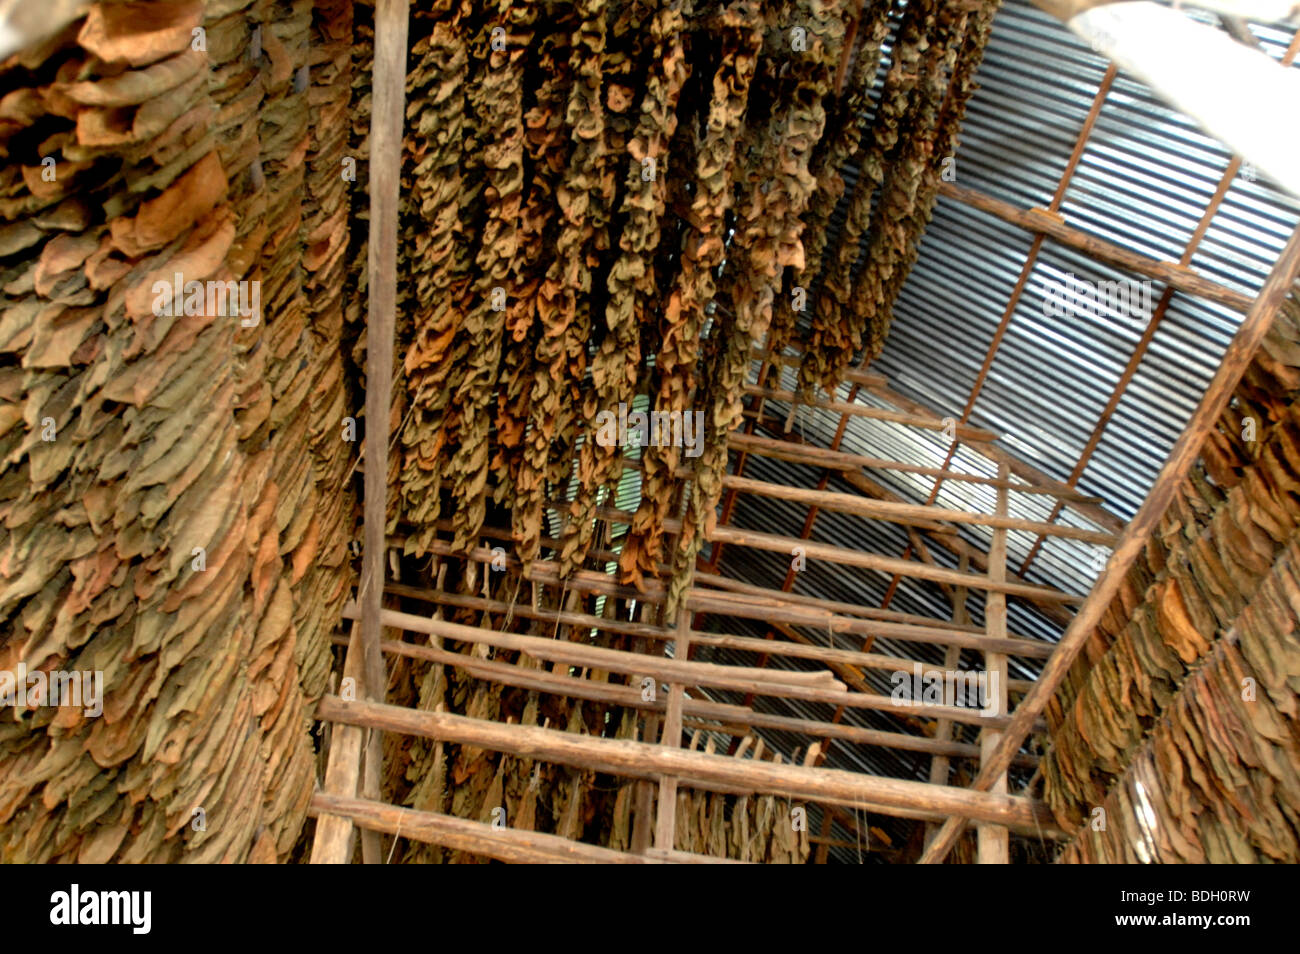 Tobacco leaves drying for Pinar del Rio cigars, Cuba. Stock Photo